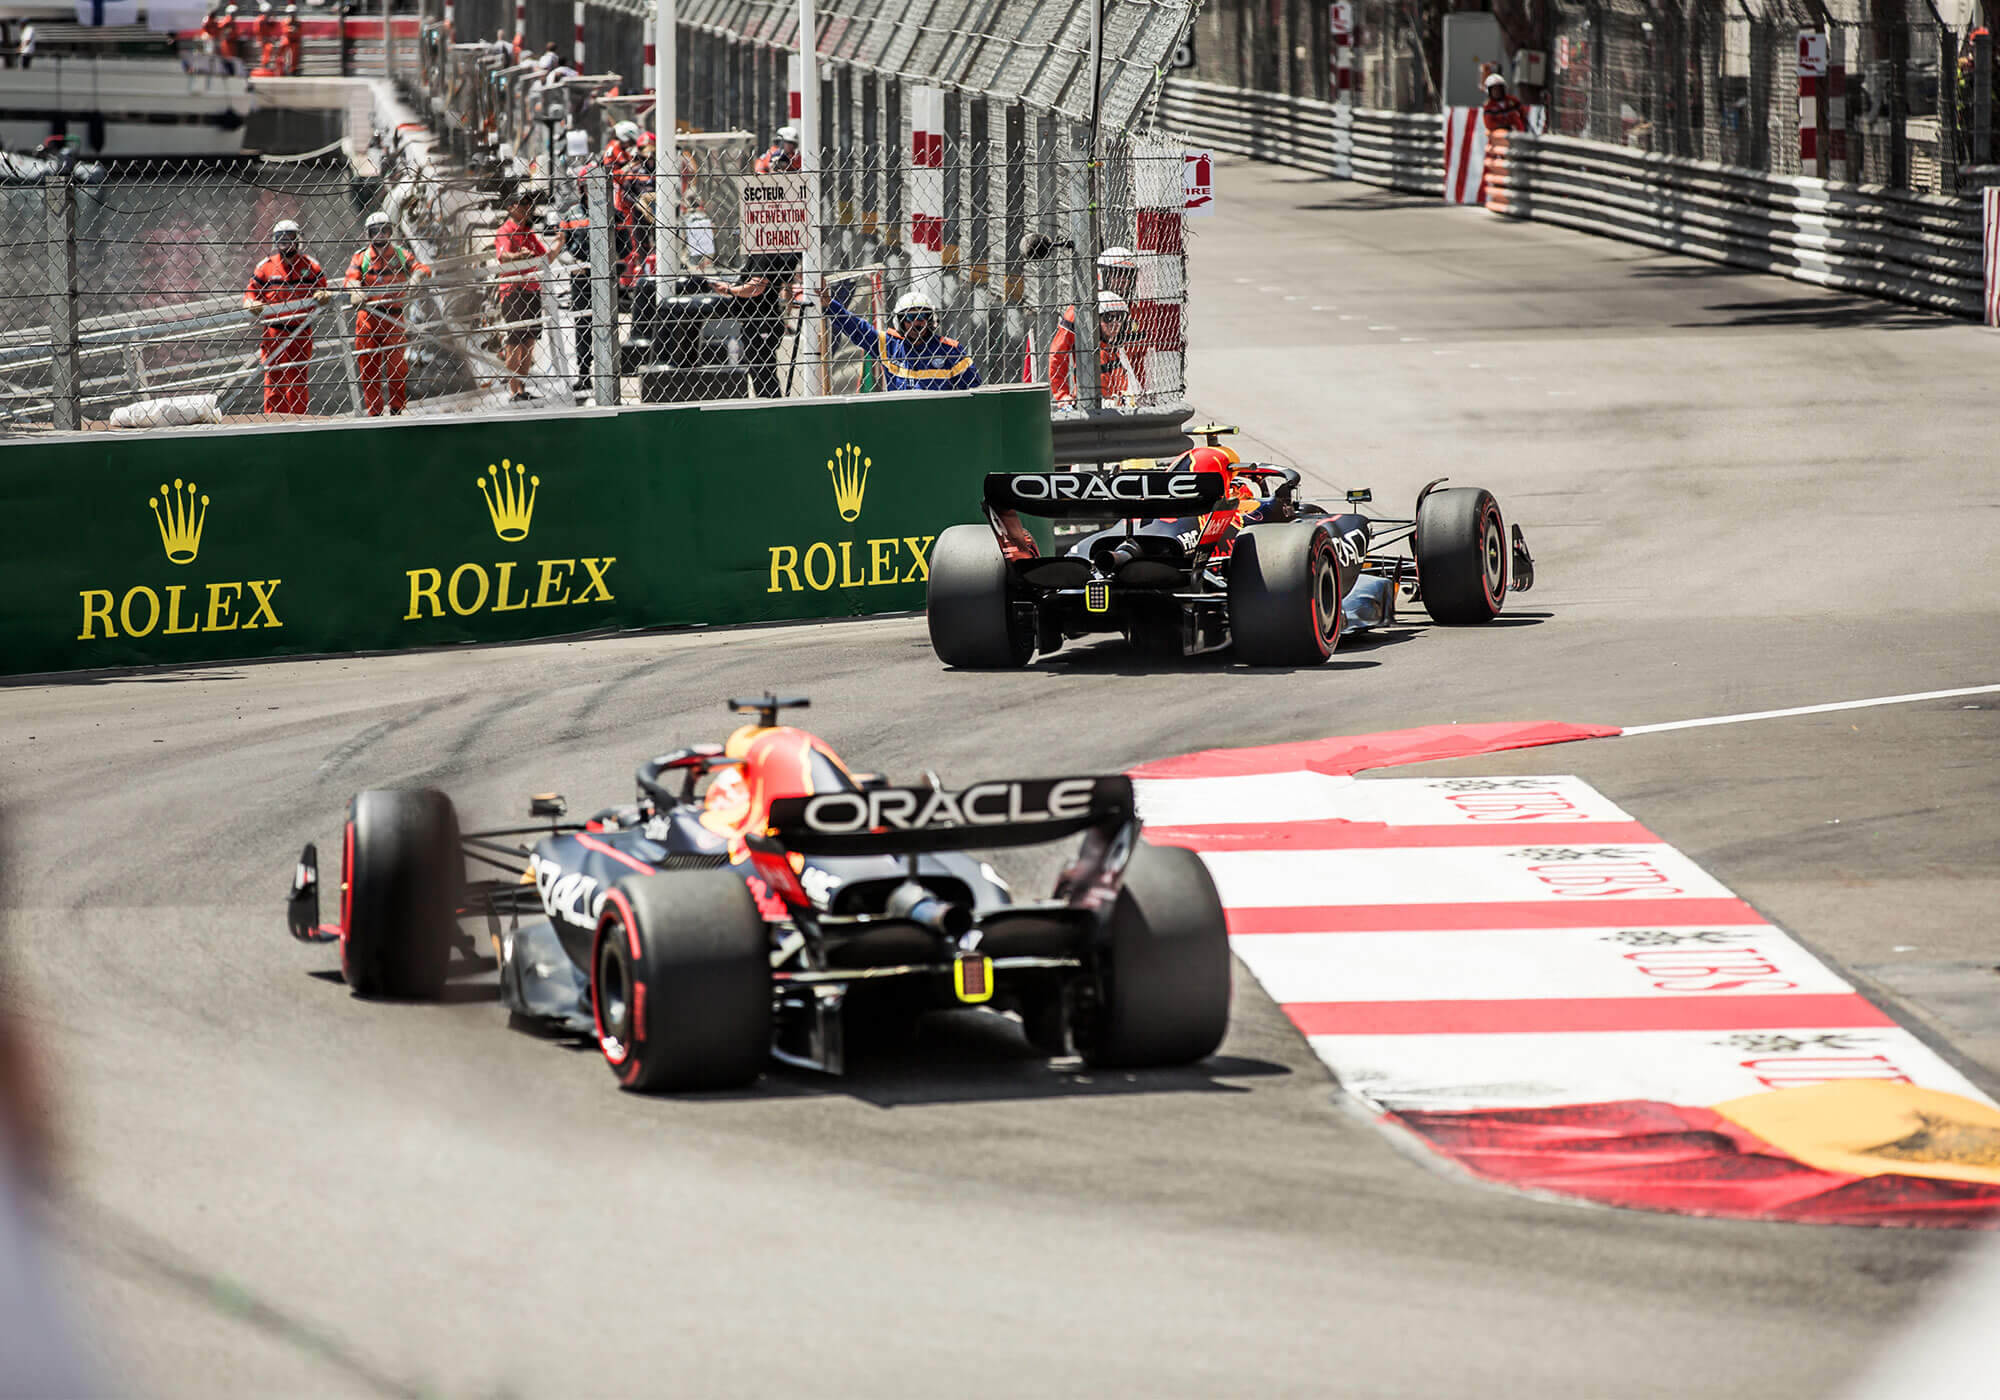 Two Red Bull F1 cars on the chicane at Monaco